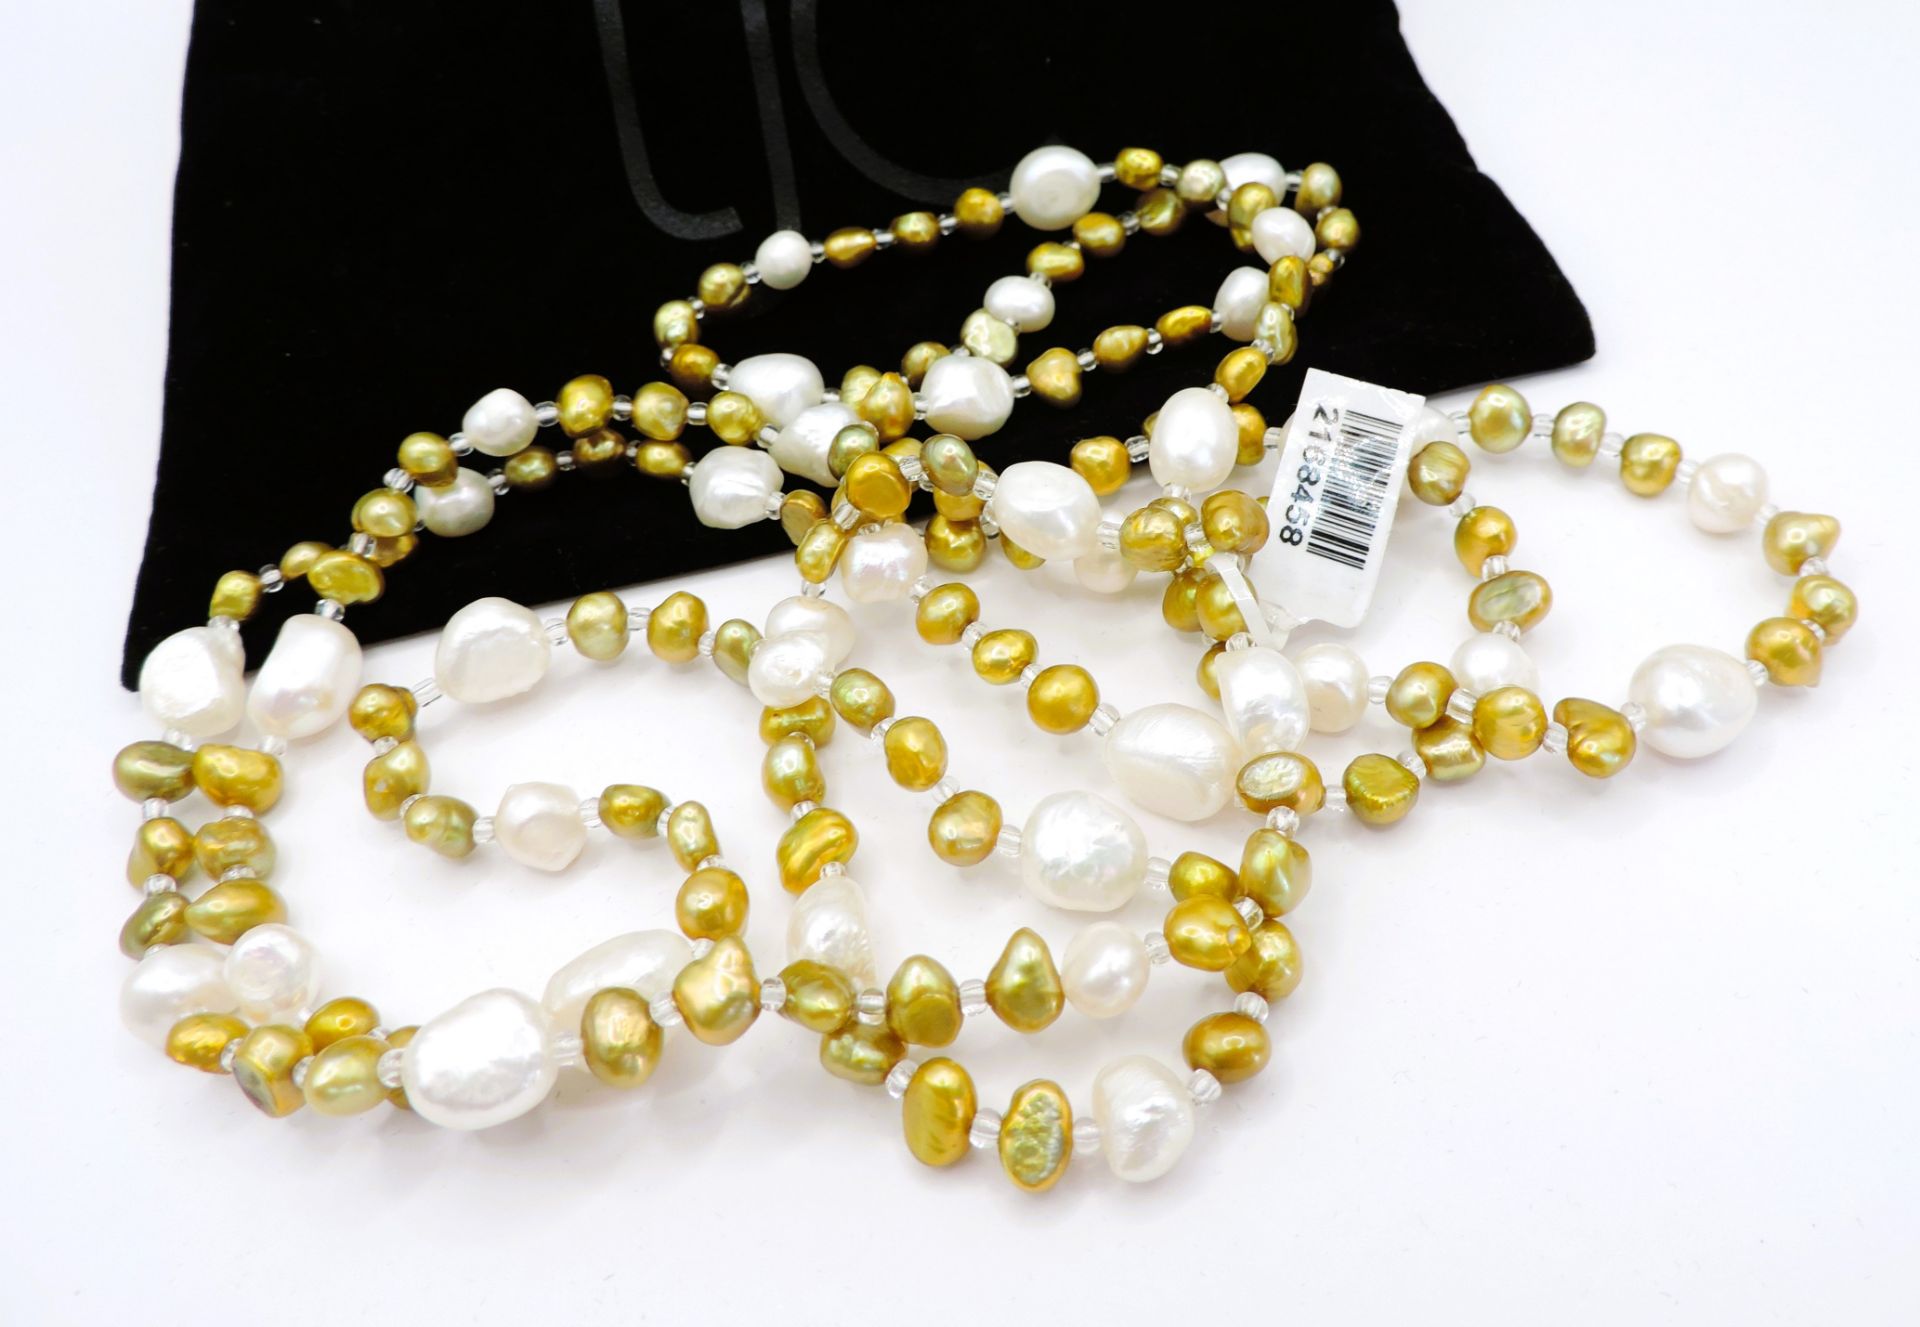 48 inch Opera Length Cultured Pearl Necklace New with Gift Pouch - Image 2 of 3